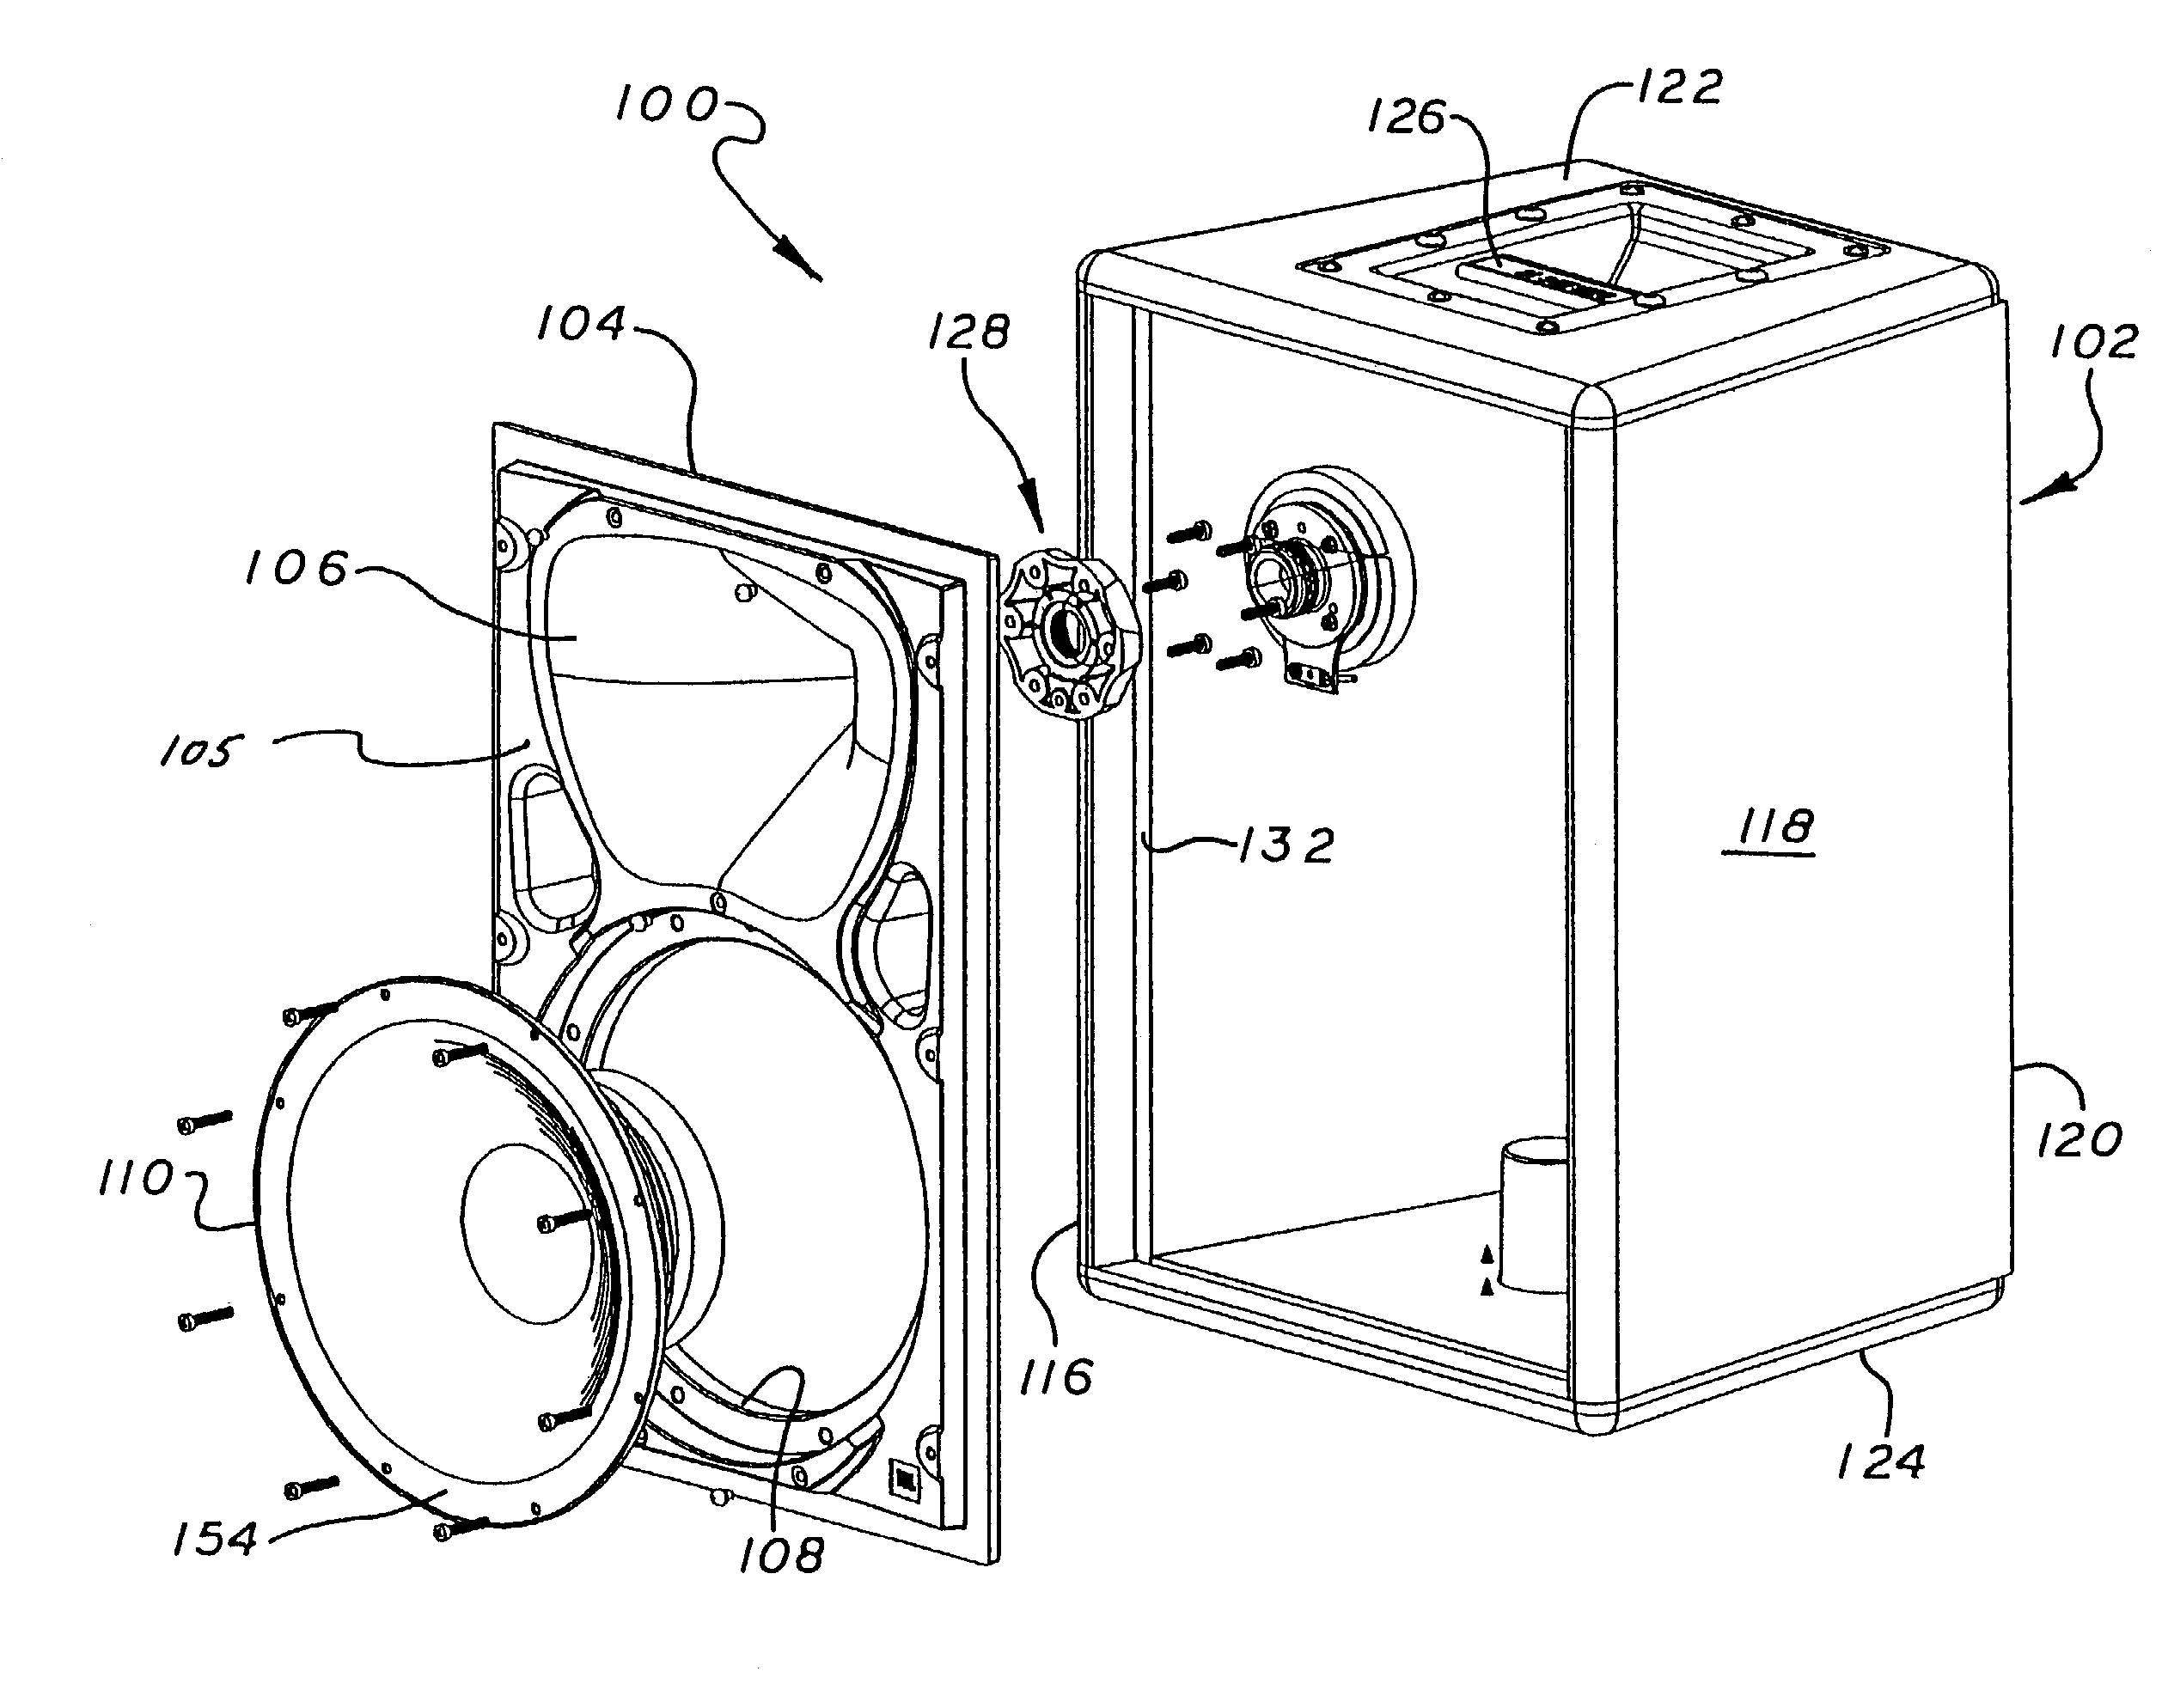 Thermoset composite material baffle for loudspeaker